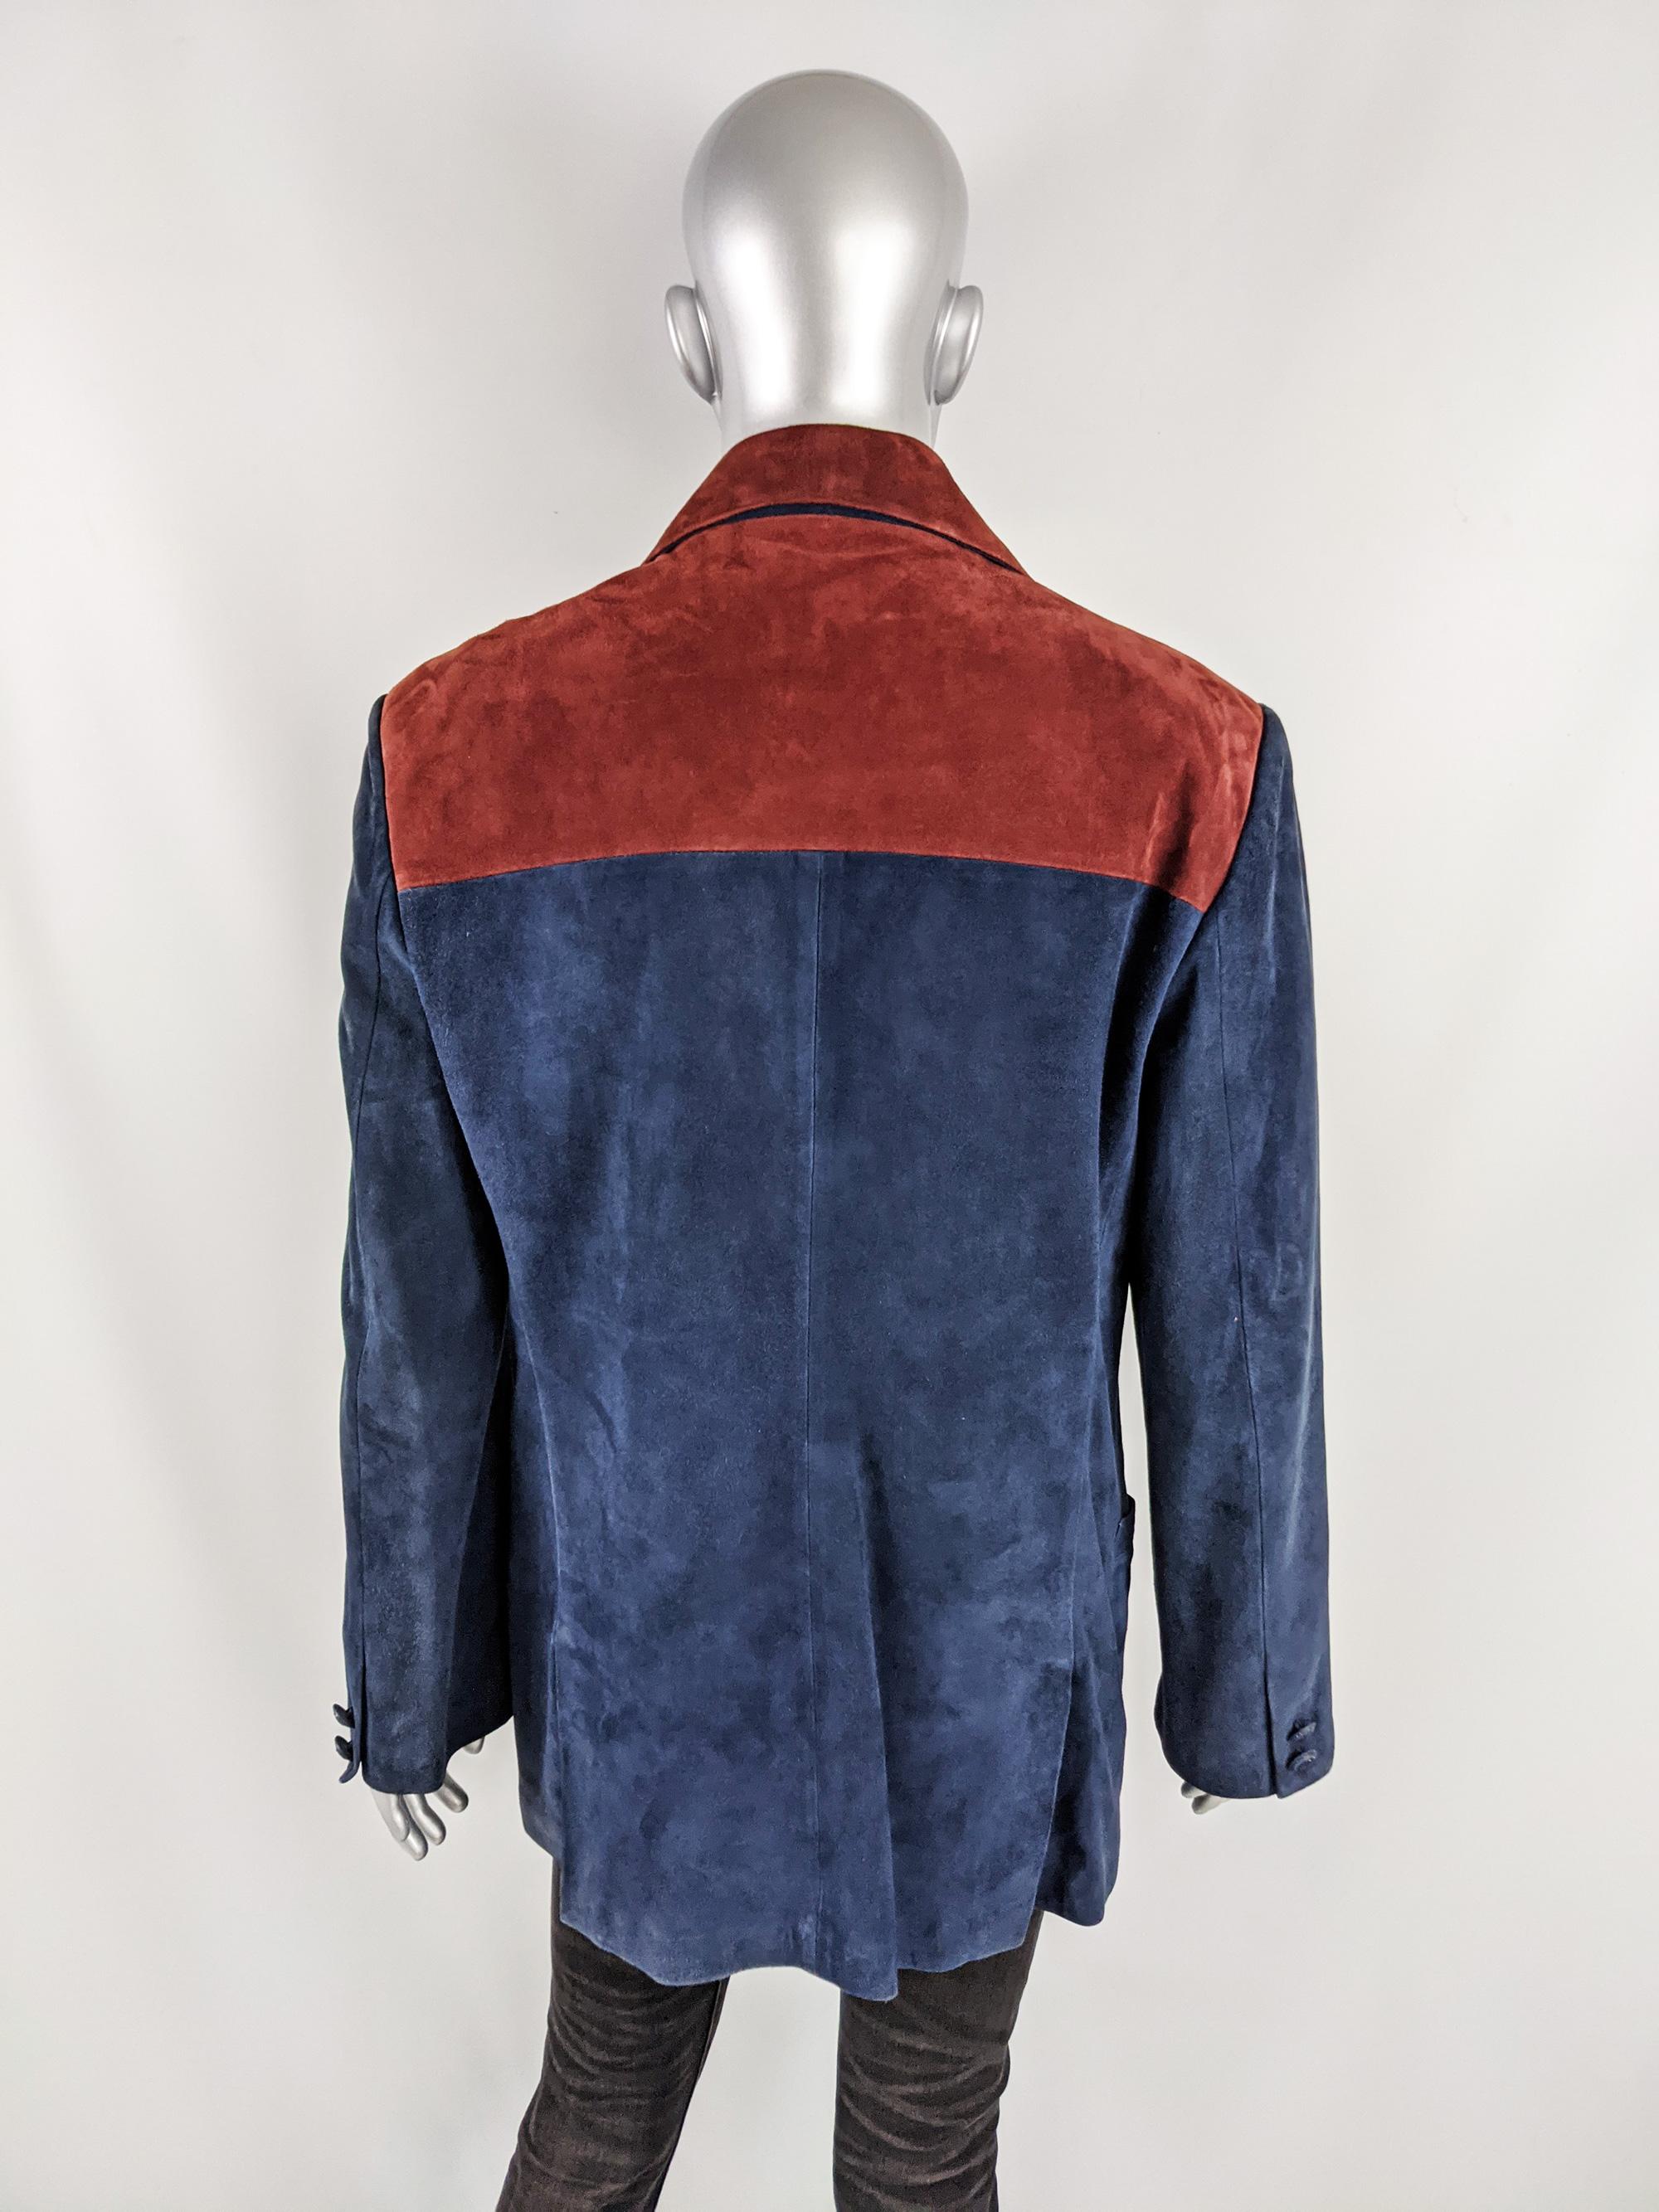 Gianni Versace Vintage Mens Red & Blue Suede Color Block Coat Jacket, A/W 1997 In Good Condition For Sale In Doncaster, South Yorkshire